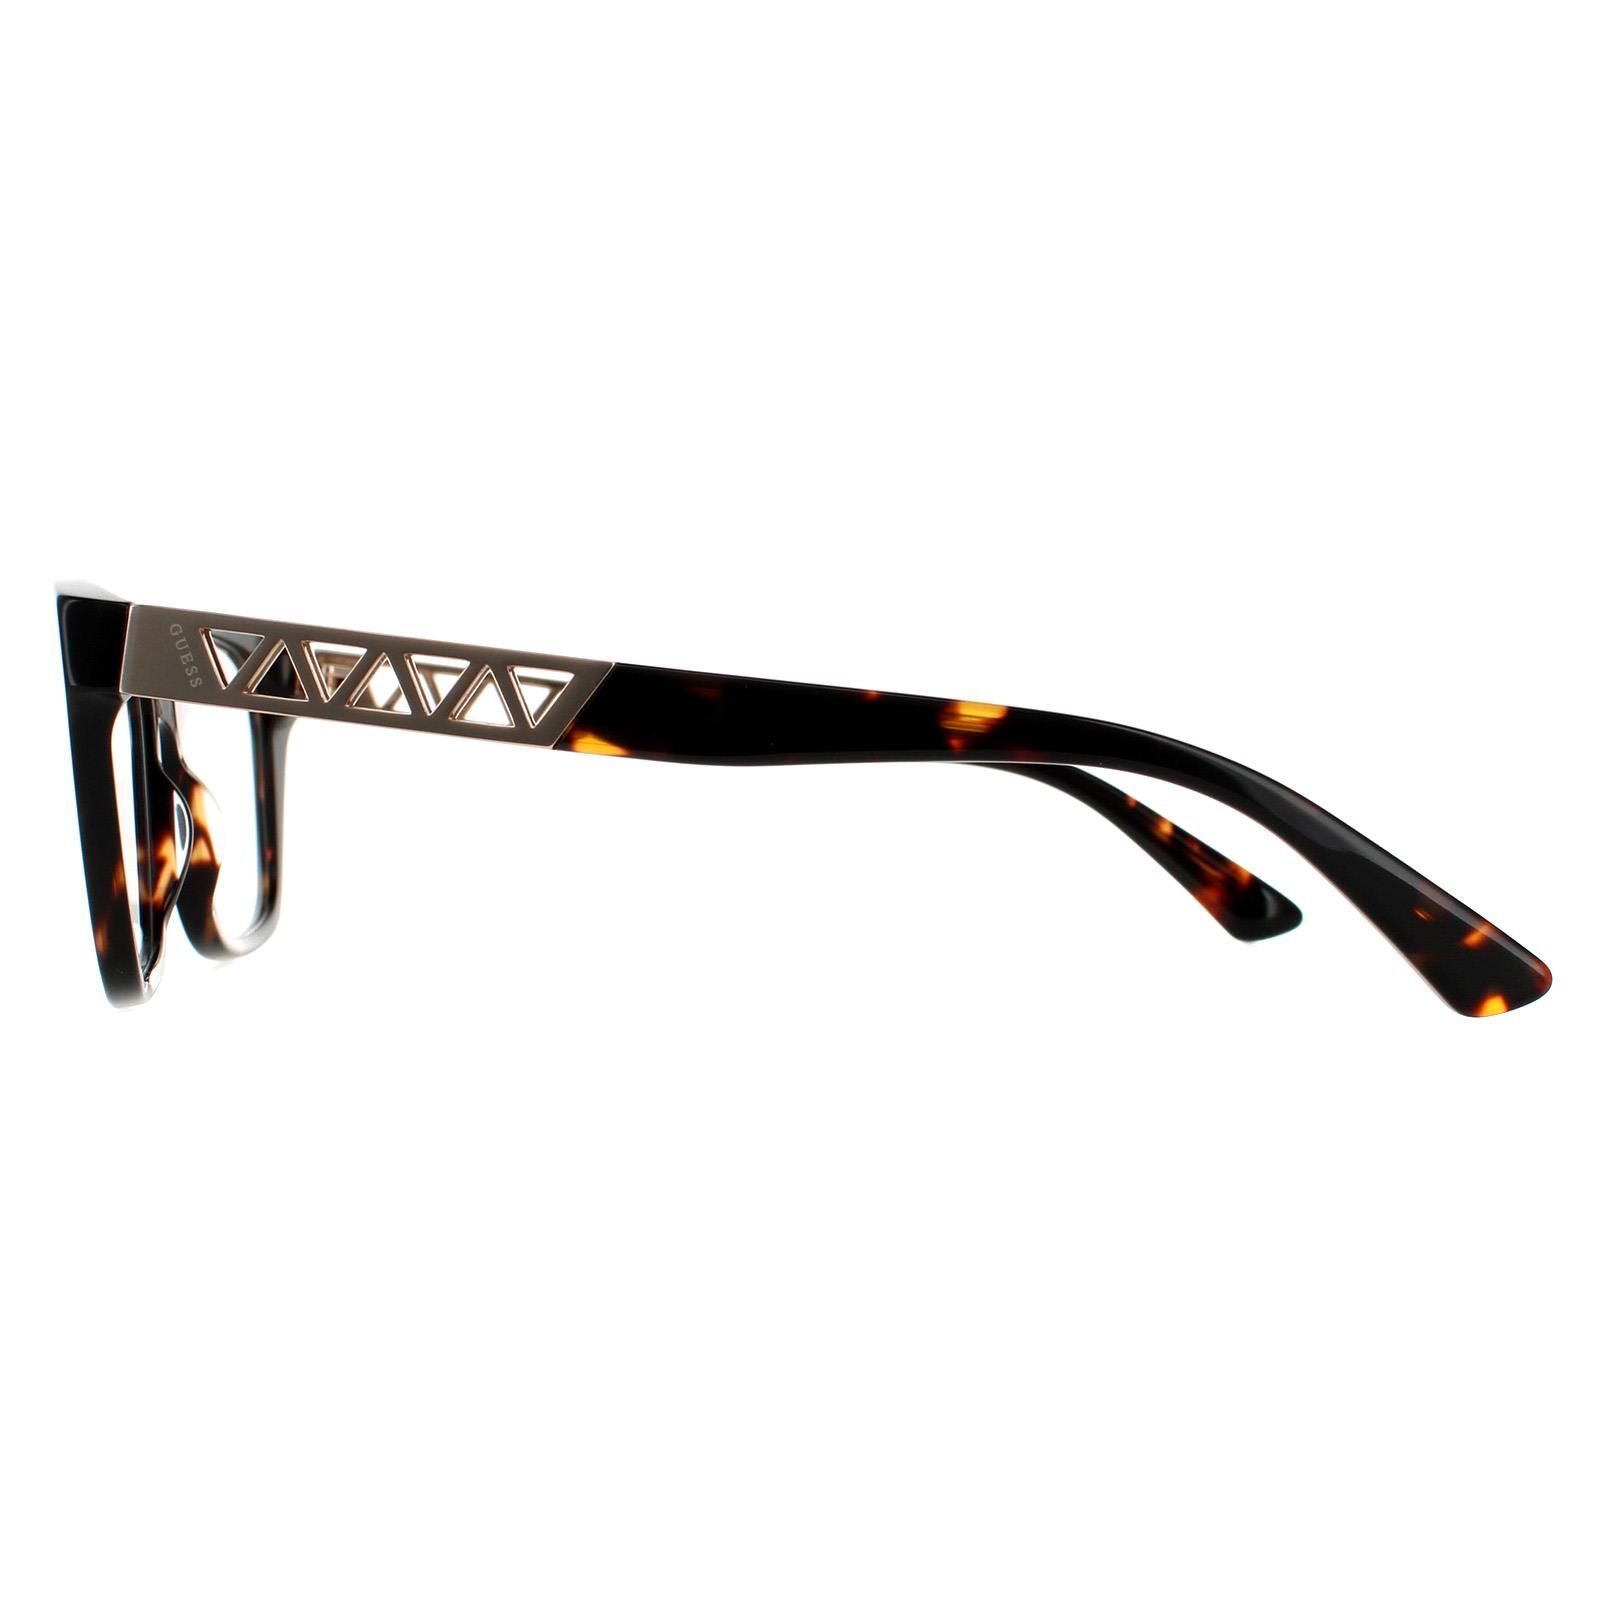 Guess Rectangular Womens Dark Havana Glasses Frames GU2784 are a stunning square design crafted from lightweight plastic with a metal cut out motif along the temples that has a sparkling chain attachment.